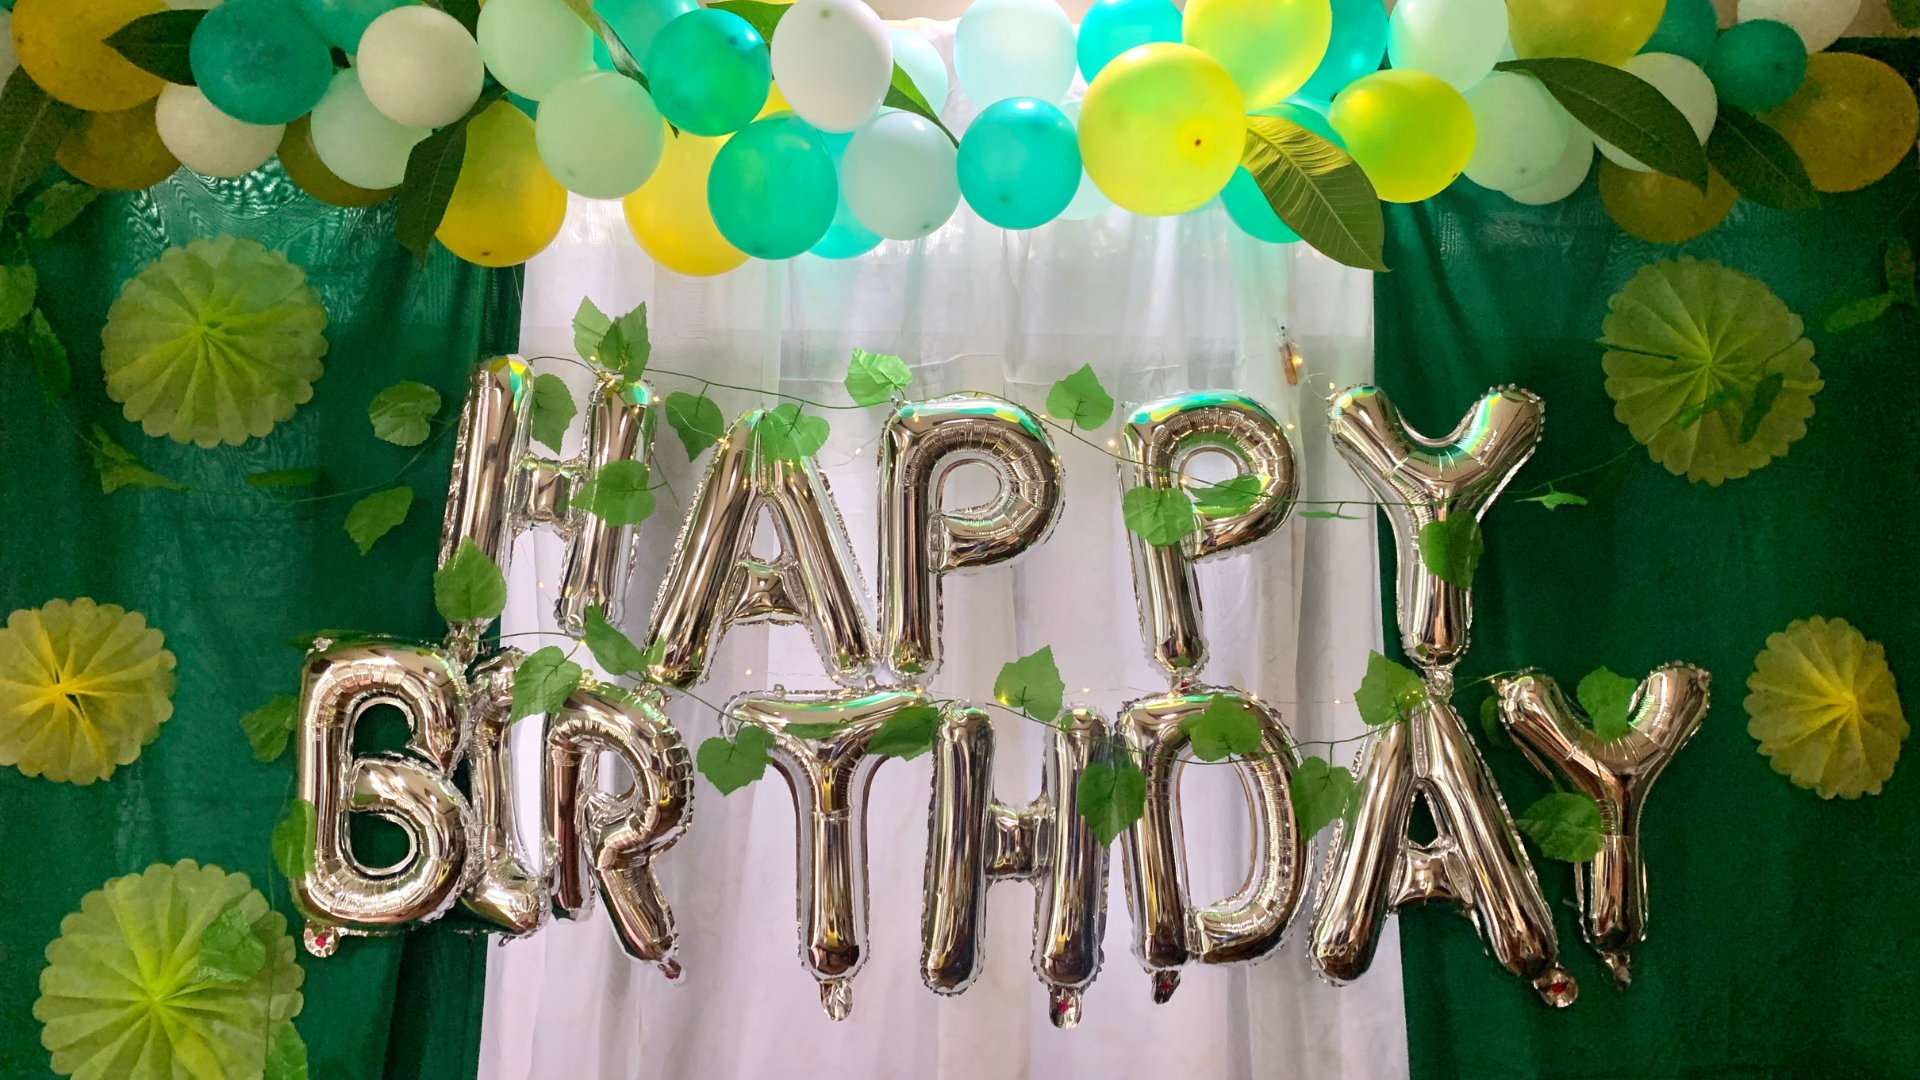 Happy Birthday spelled out in silver balloons with bunting and backdrop